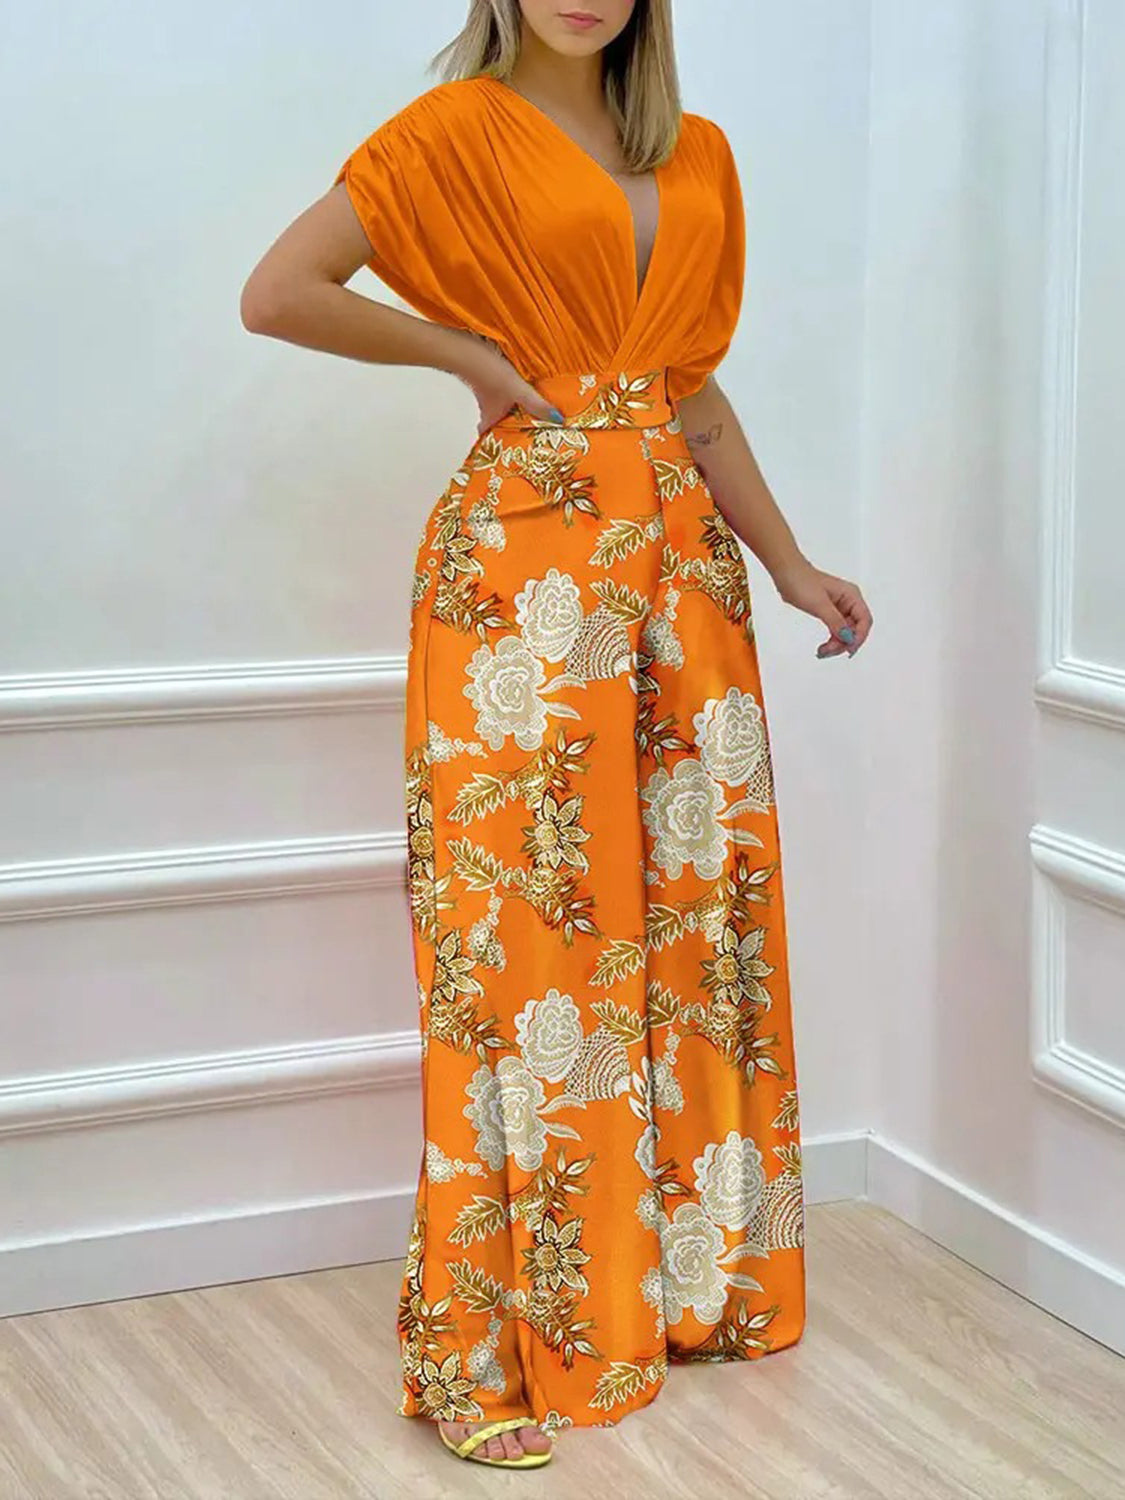 MUST WEAR AN INNER BLOUSE FOR THIS ITEM FOR MODESTY  - Printed Surplice Top and Wide Leg Pants Set